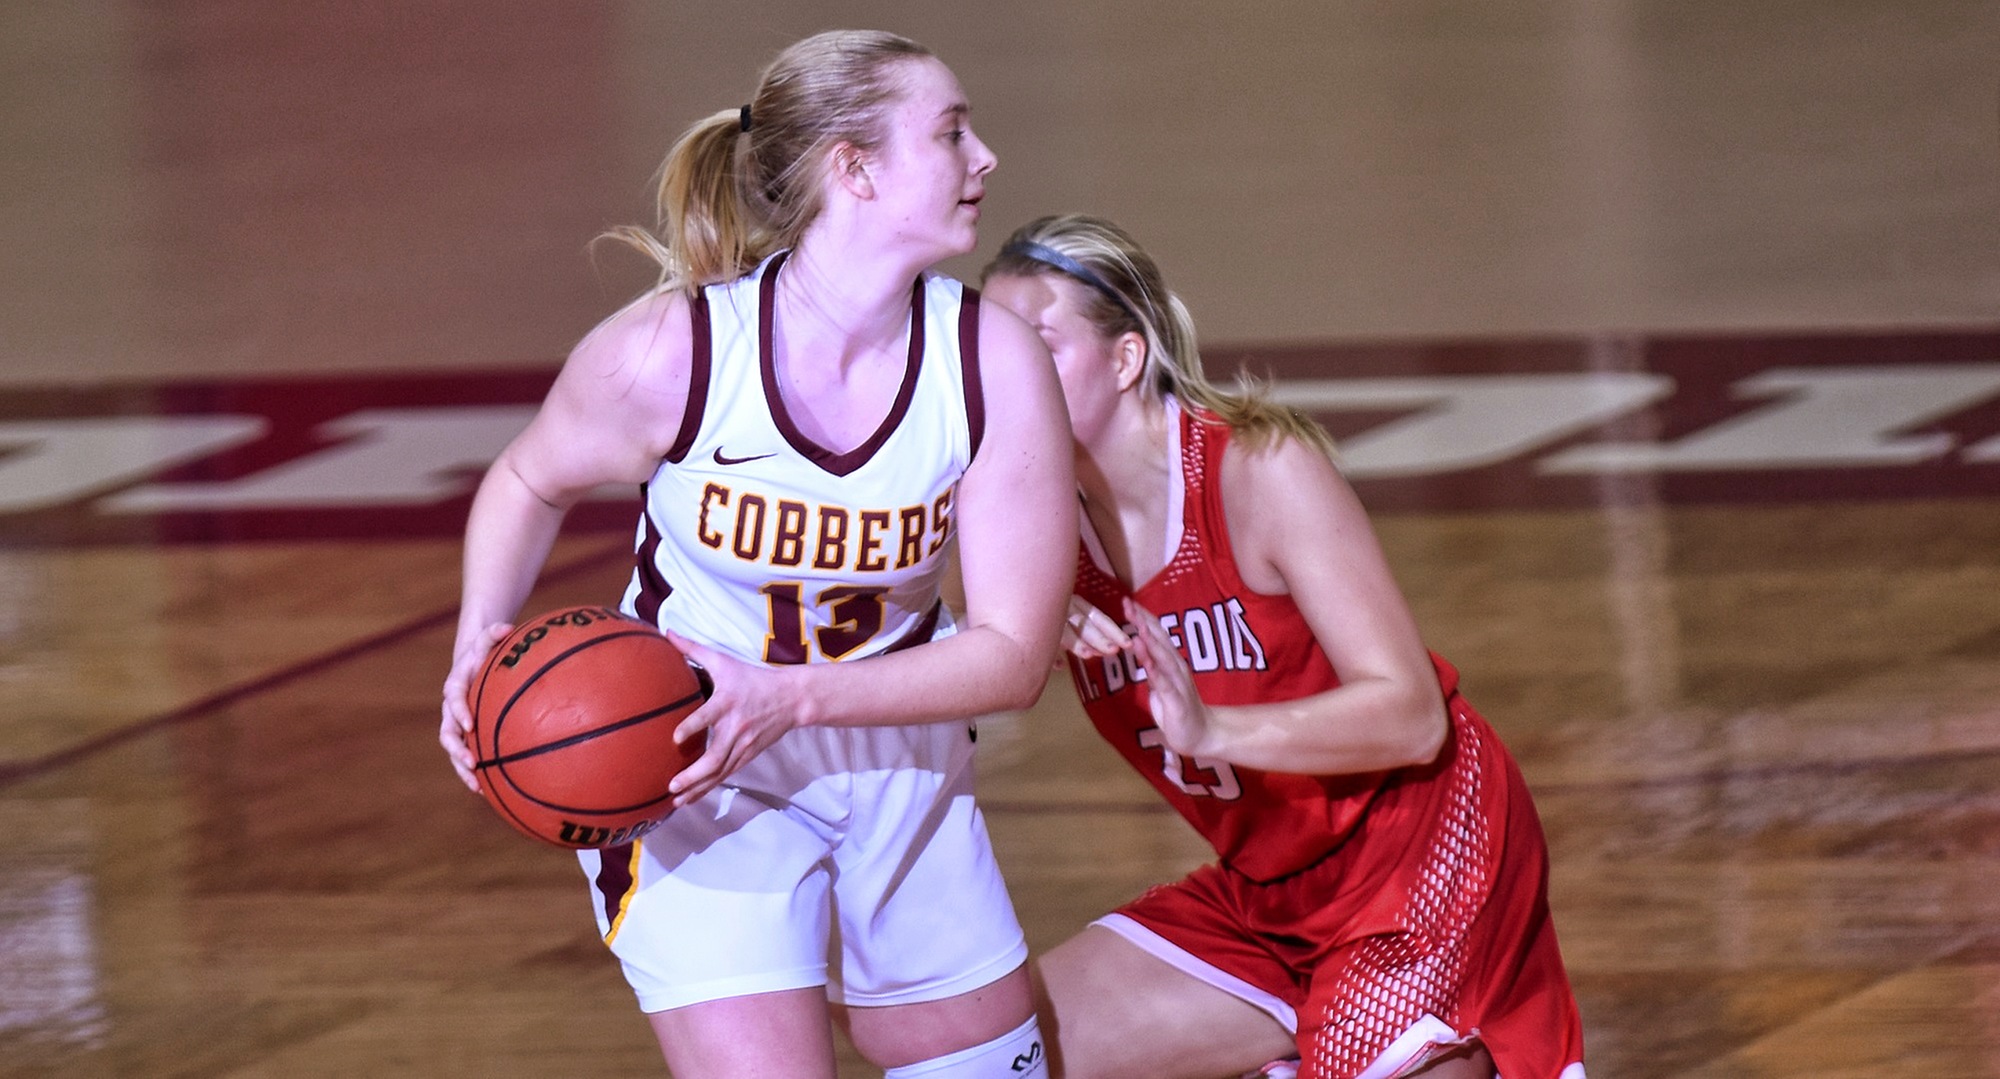 Sophomore Bailee Larson looks to make a pass in the second half of the Cobbers' win over St. Ben's. She had a career-high 15 rebounds in the game.